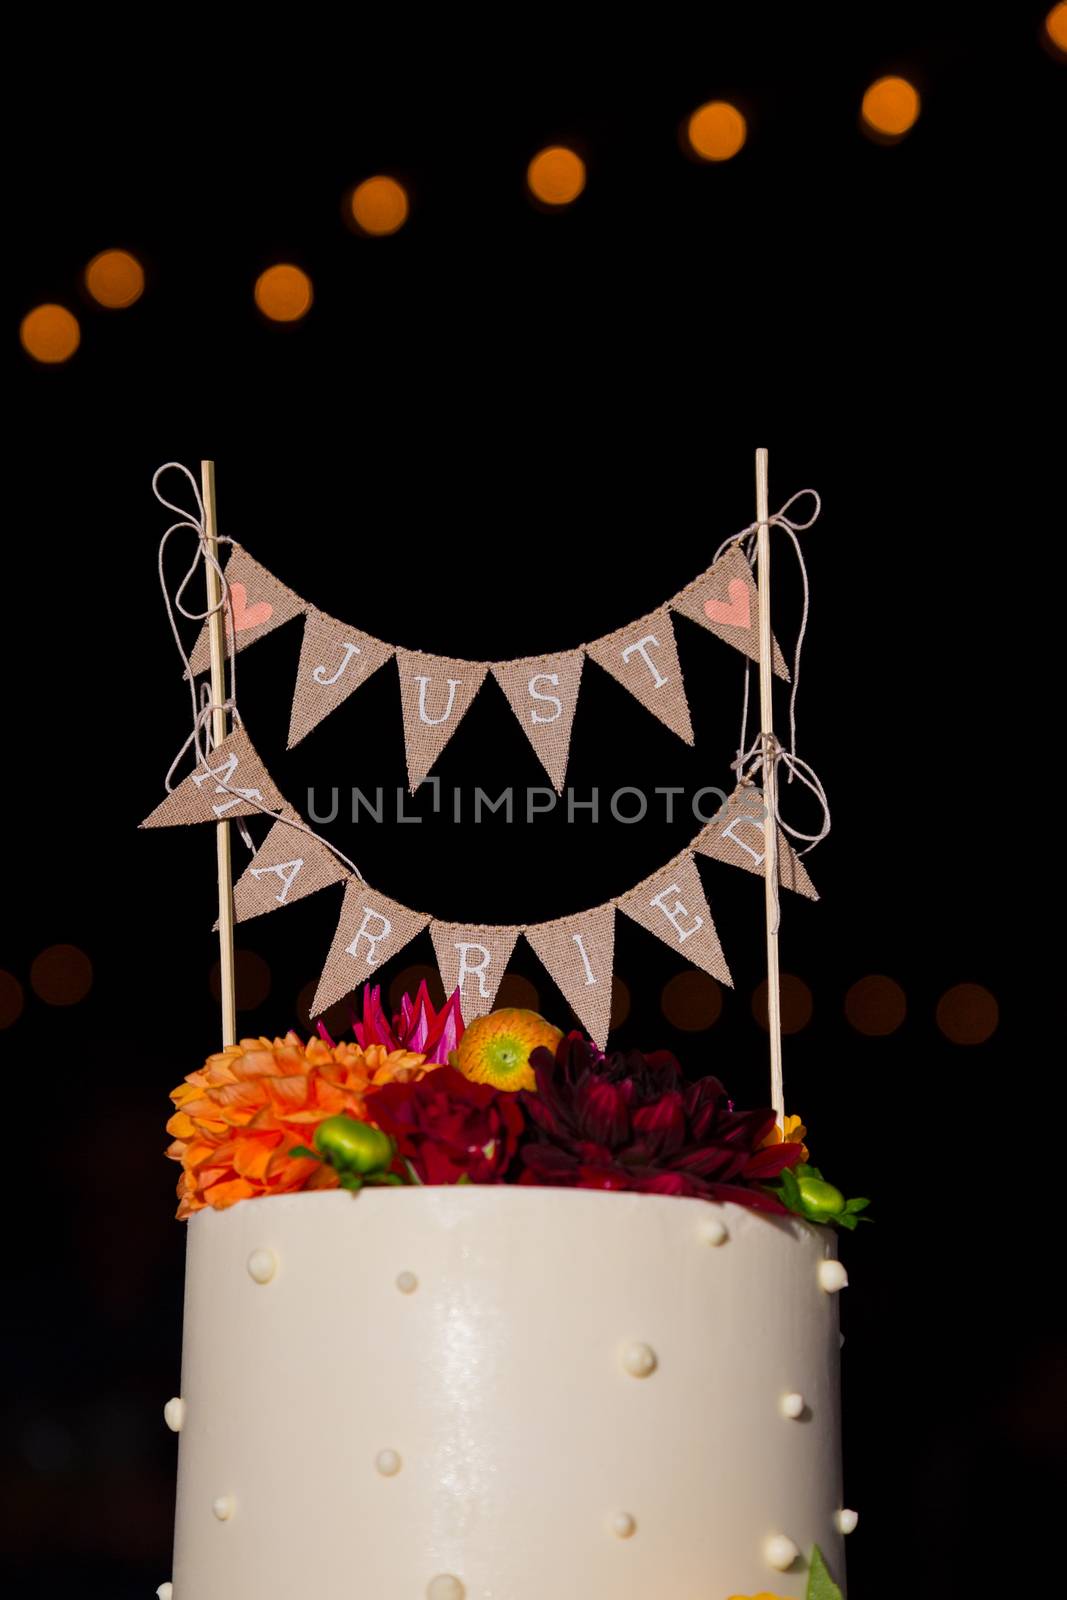 A handmade cake topper has flags that say just married on it above the wedding cake at this reception party.